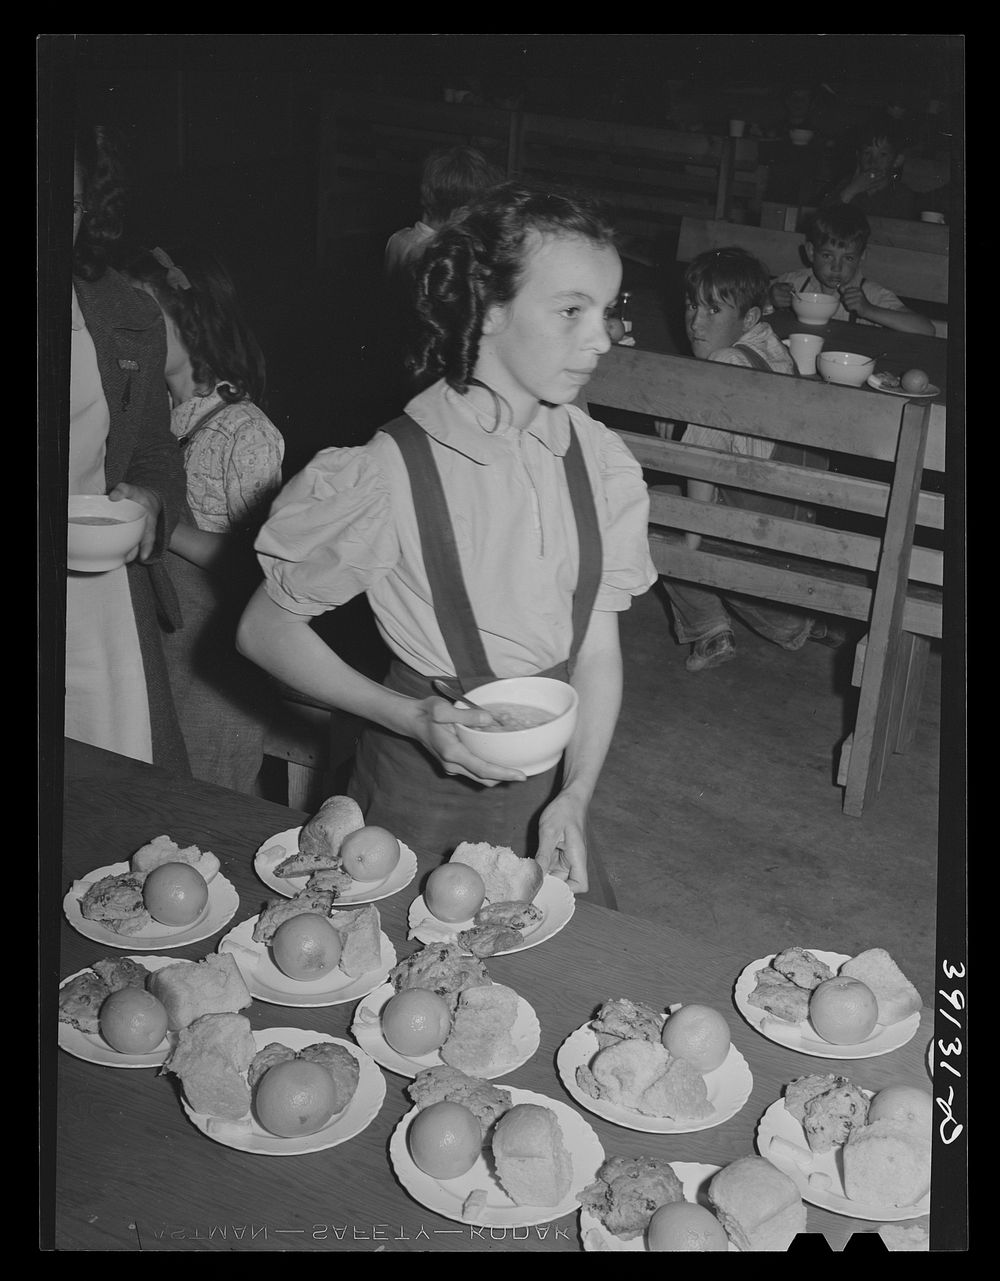 Lunch for schoolchildren, most of whose parents are working in the fields. FSA (Farm Security Administration) farm workers'…